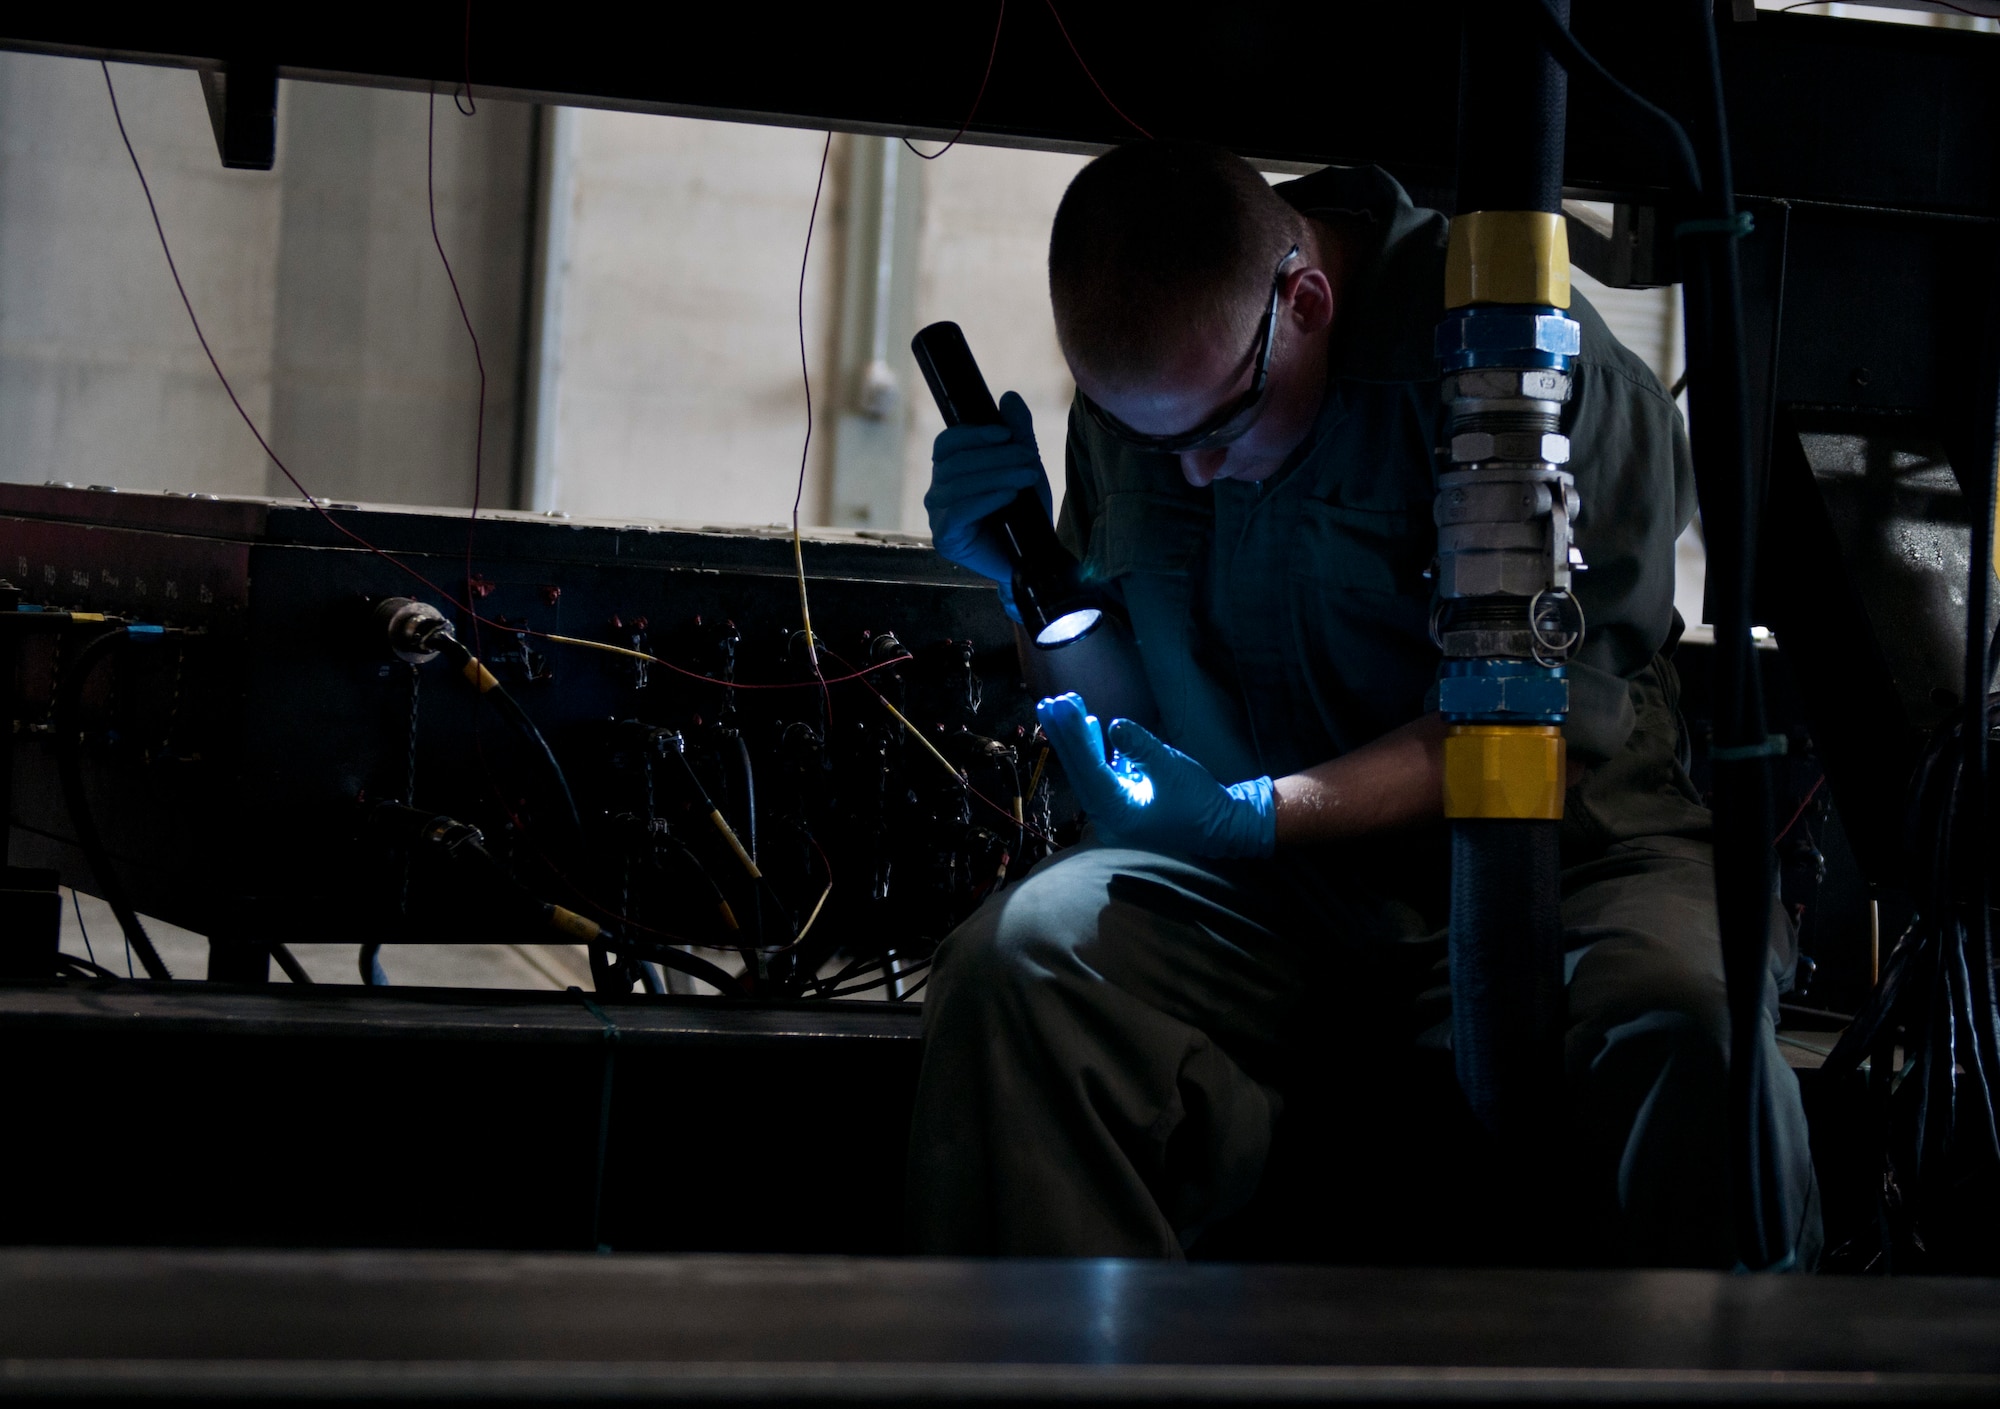 U.S. Air Force Airman 1st Class Ryan Barron, 366th Component Maintenance Squadron aerospace propulsion apprentice, uses his flashlight to check an F-15E Strike Eagle engine part, May 5, 2013, at Mountain Home Air Force Base, Idaho. All engine components must be checked prior to and after an engine test run. (U.S. Air Force photo by Senior Airman Heather Hayward/Released)